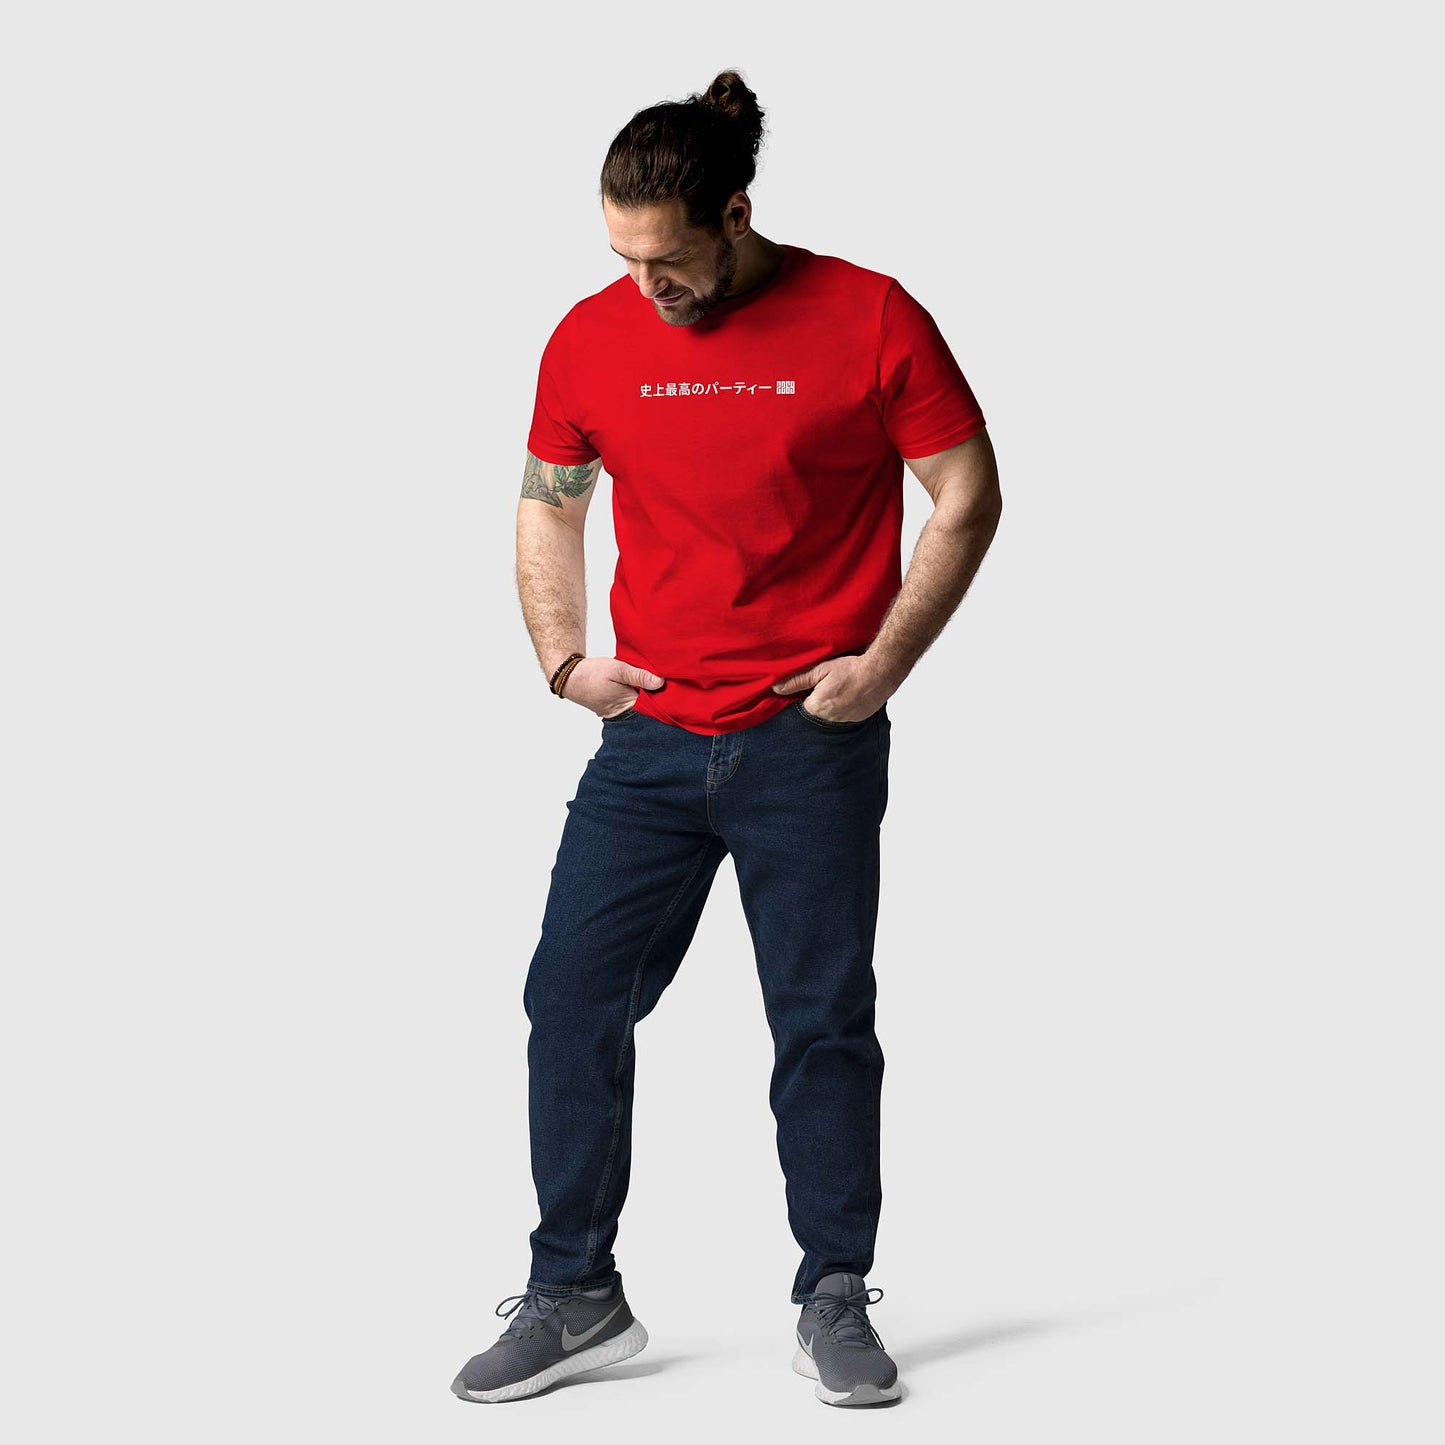 Men's red organic cotton t-shirt with Japanese 2269 party message